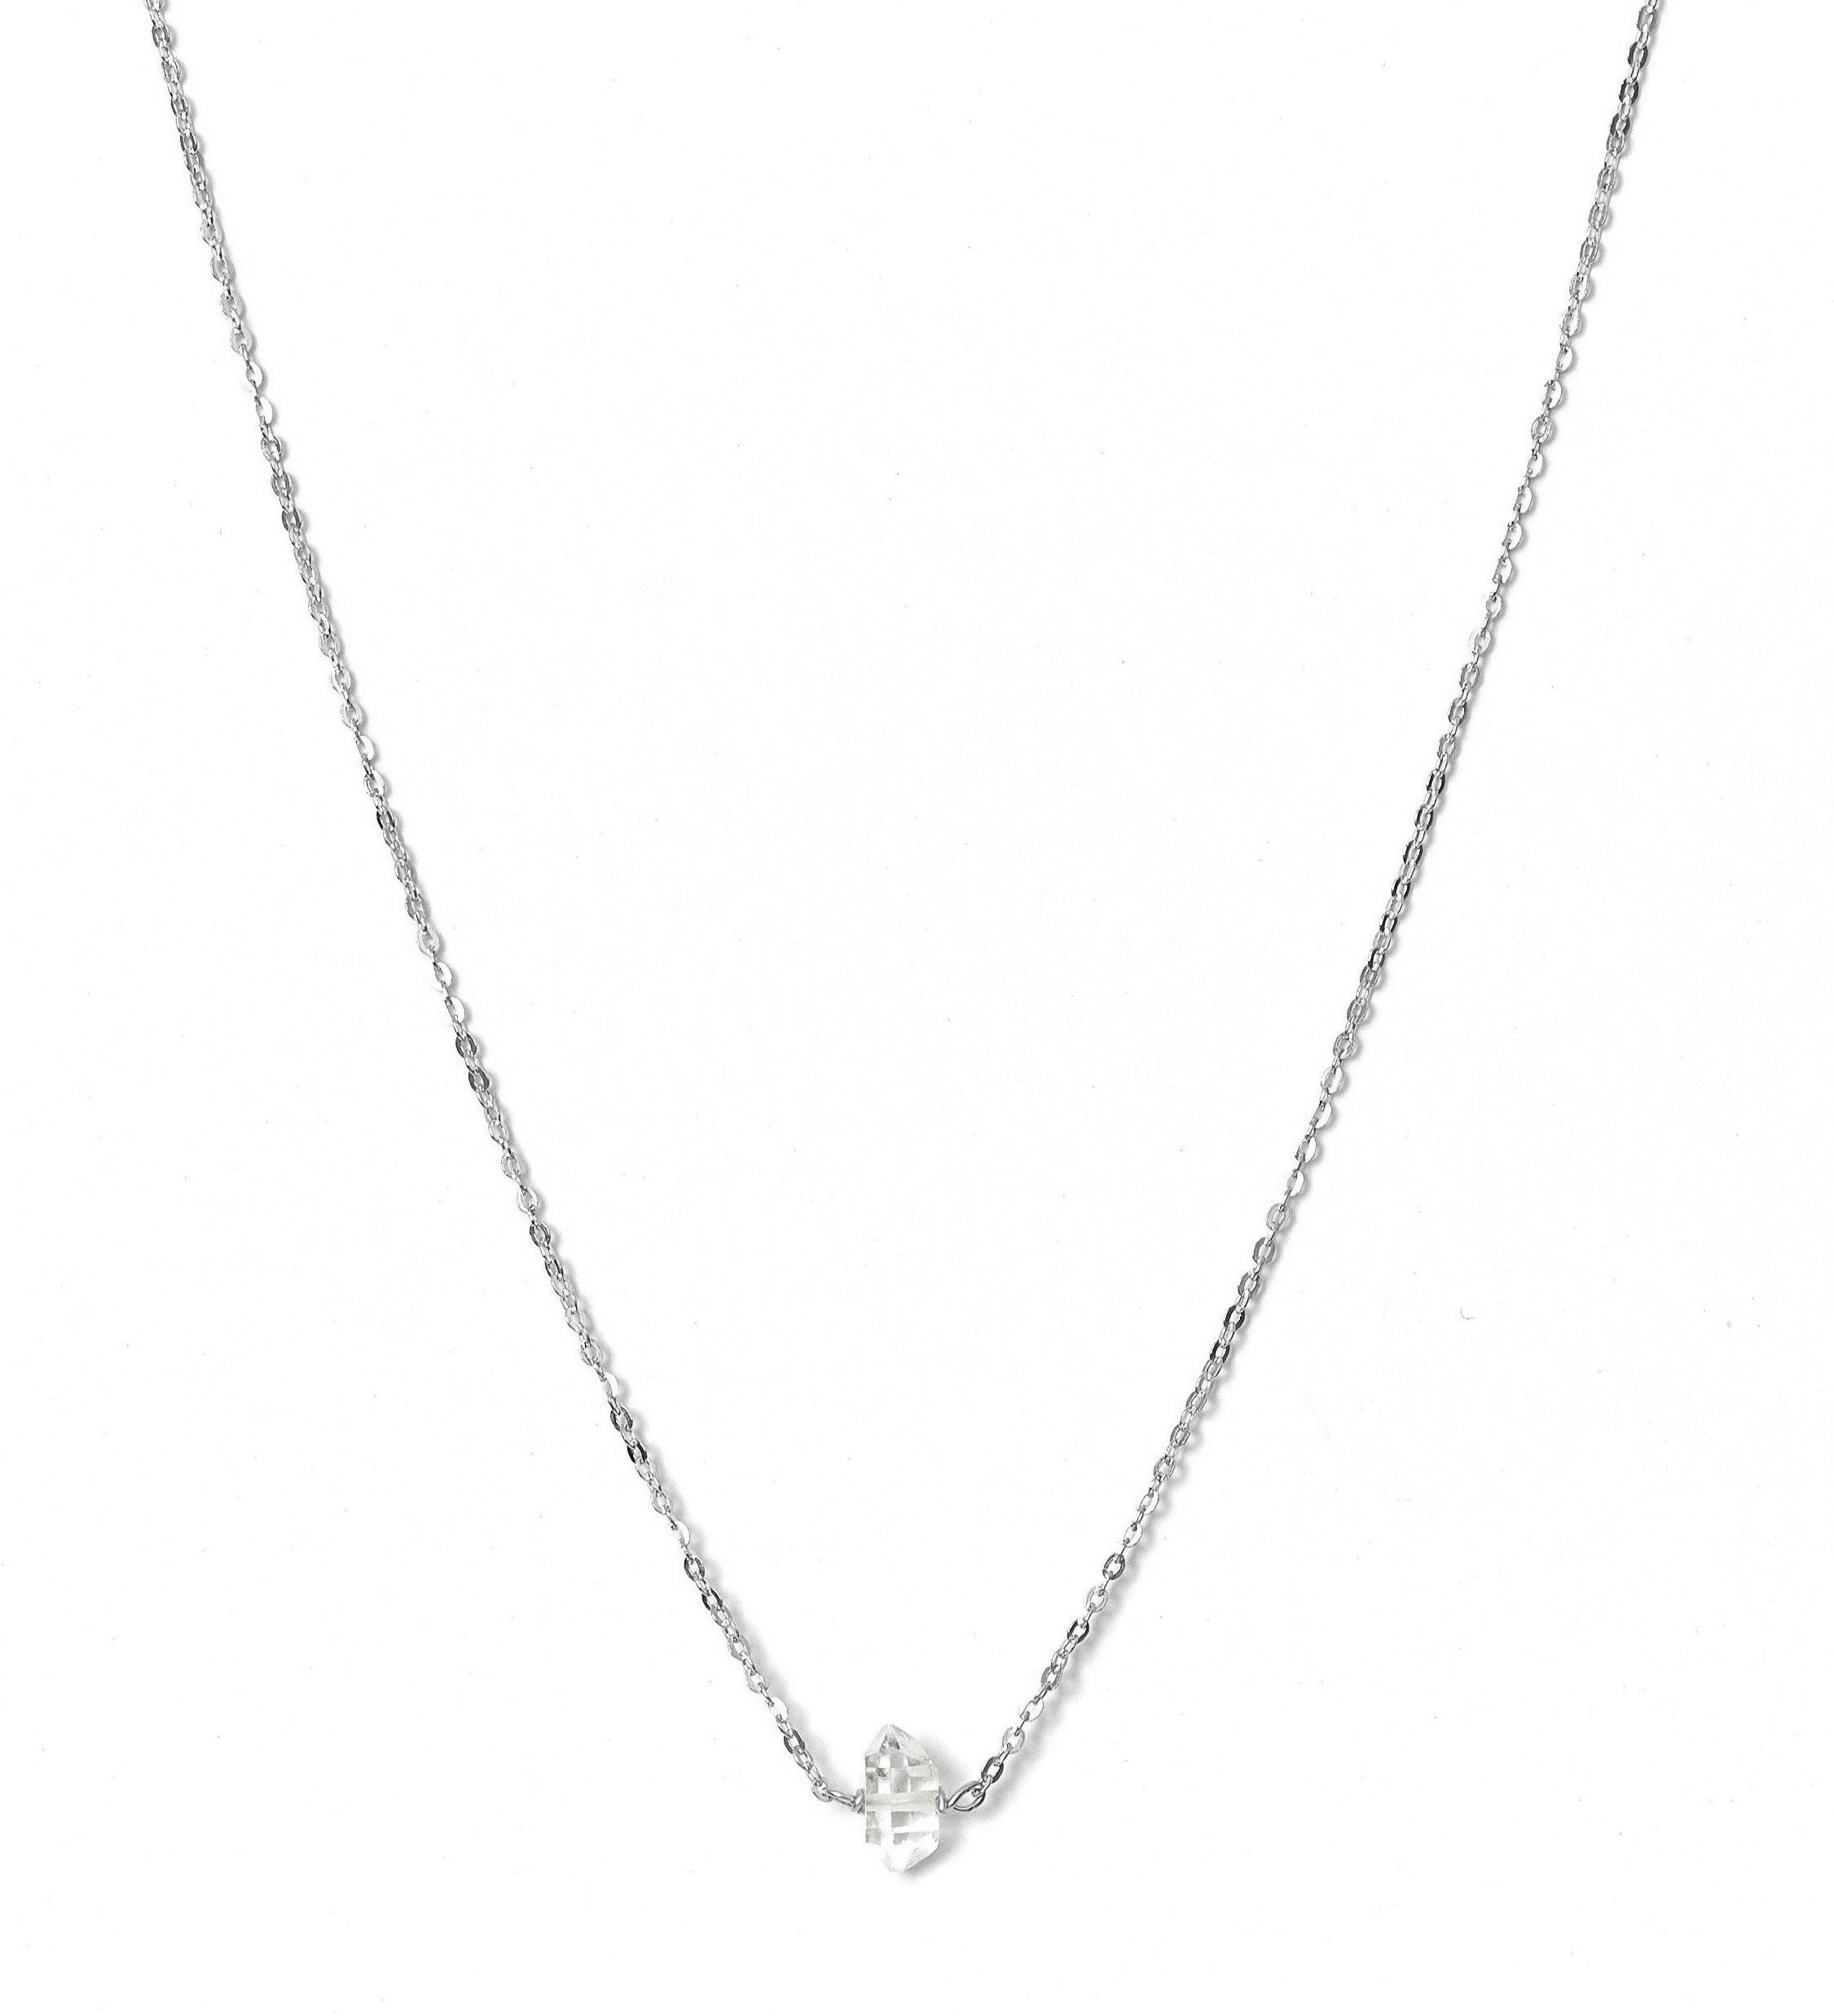 Dia Necklace by KOZAKH. A 16 to 18 inch adjustable length necklace in Sterling Silver, featuring a Herkimer Diamond.